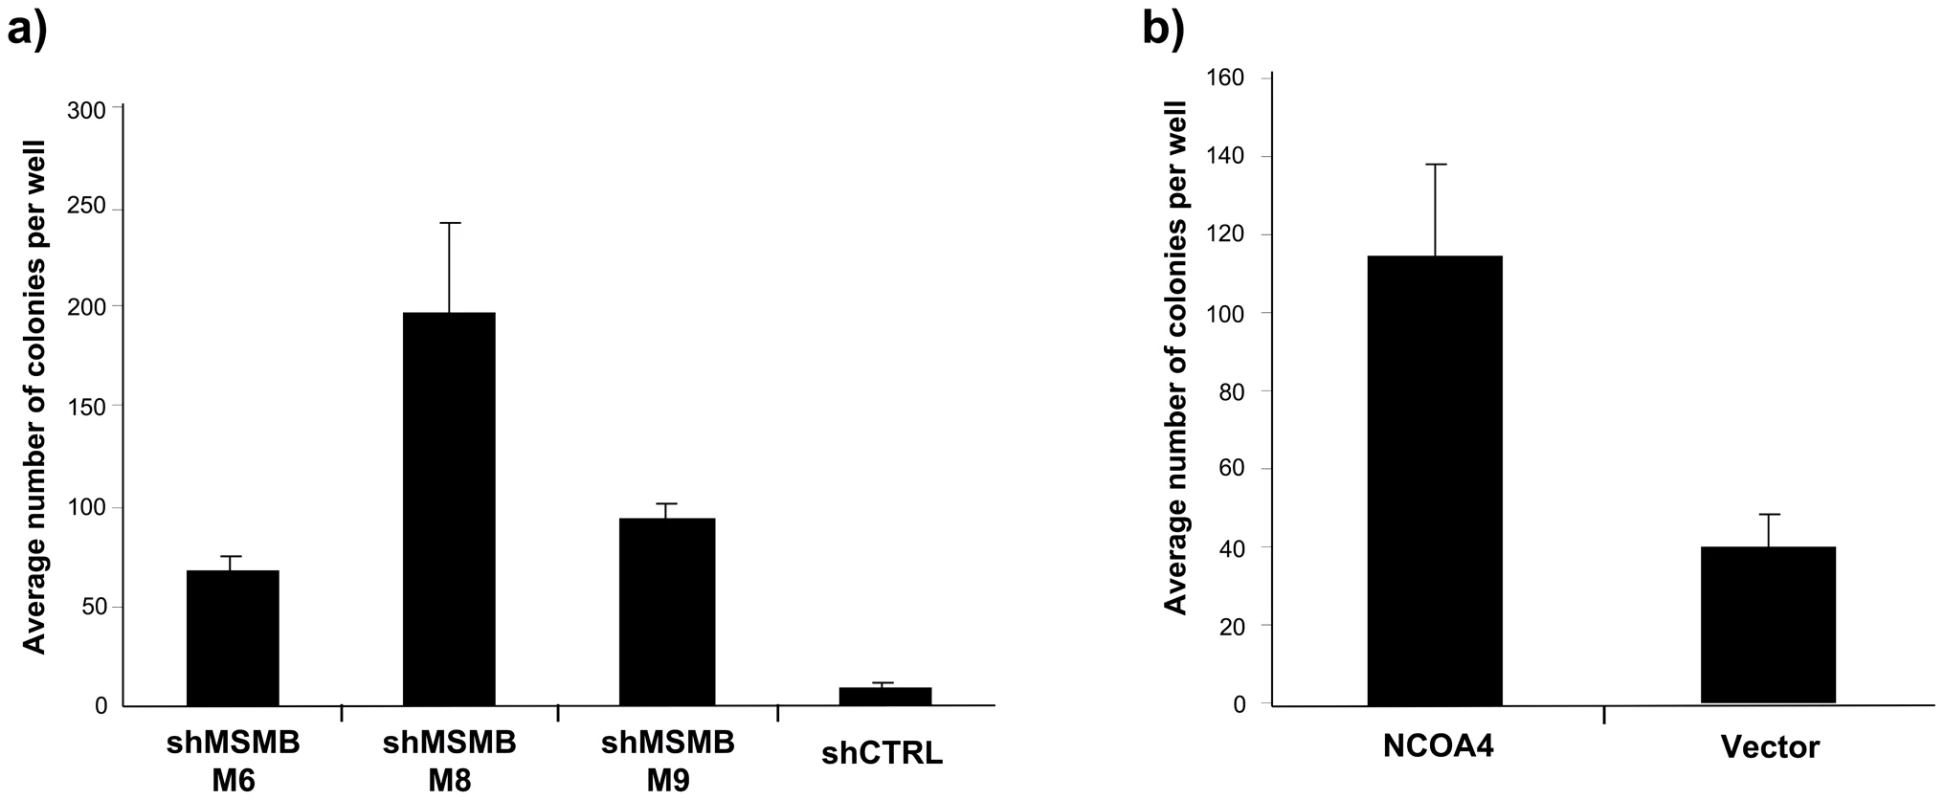 Suppressing <i>MSMB</i> or overexpressing <i>NCOA4</i> is associated with increased anchorage-independent growth of prostate epithelial cells.